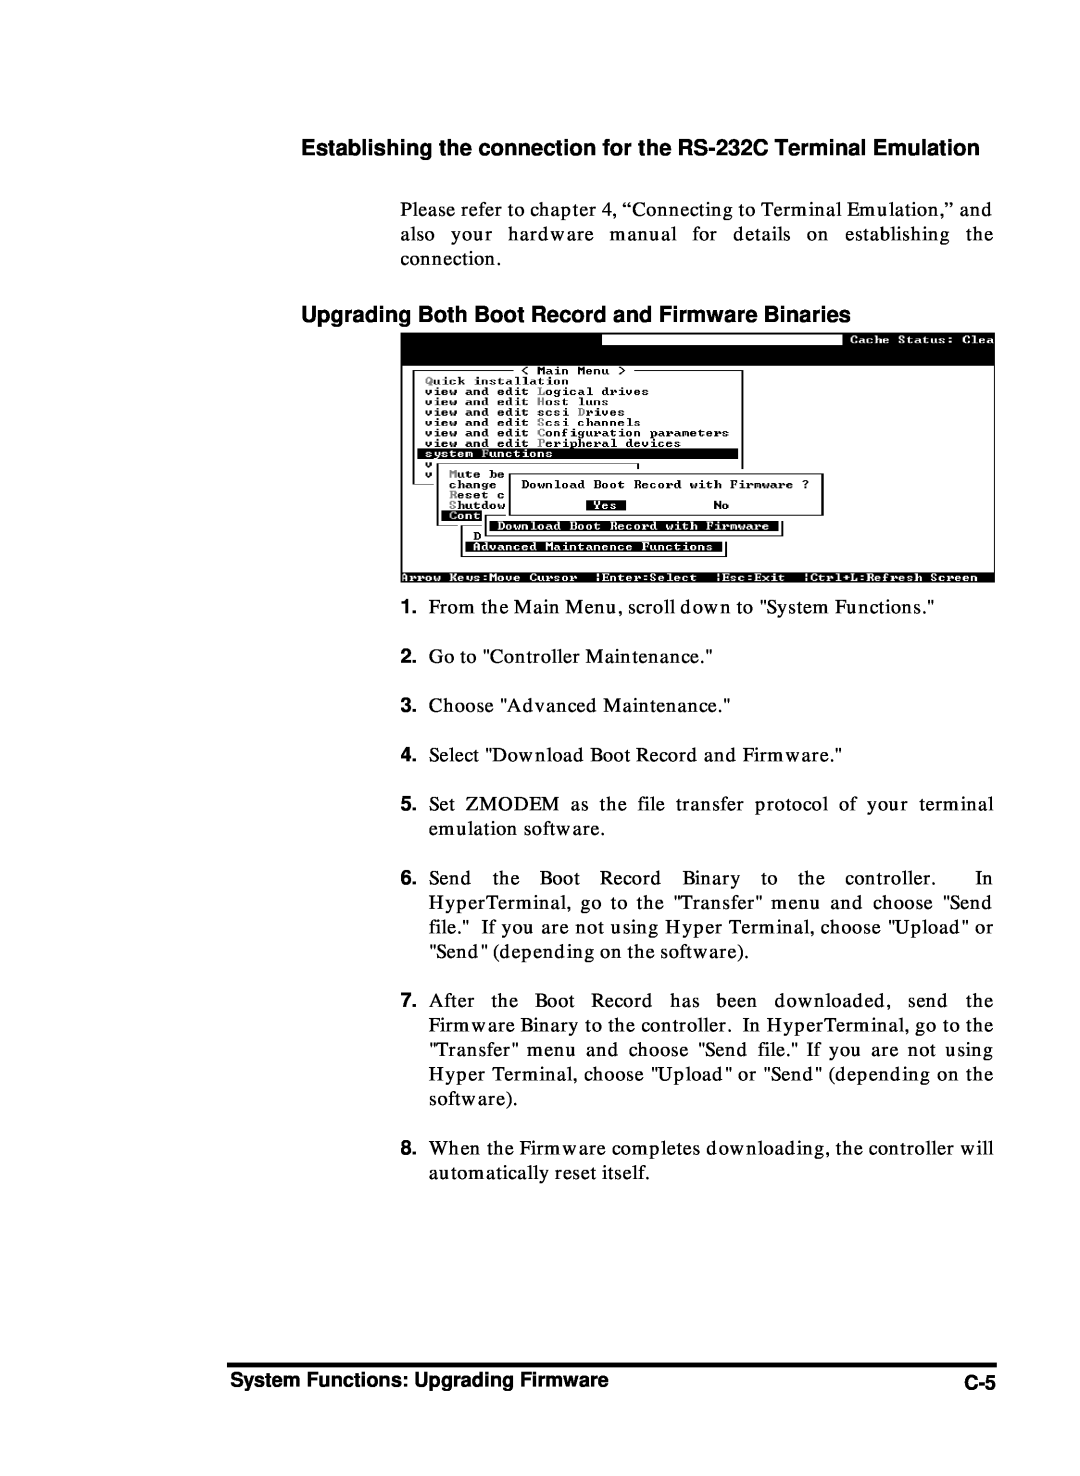 Compaq Infortrend manual Establishing the connection for the RS-232C Terminal Emulation 